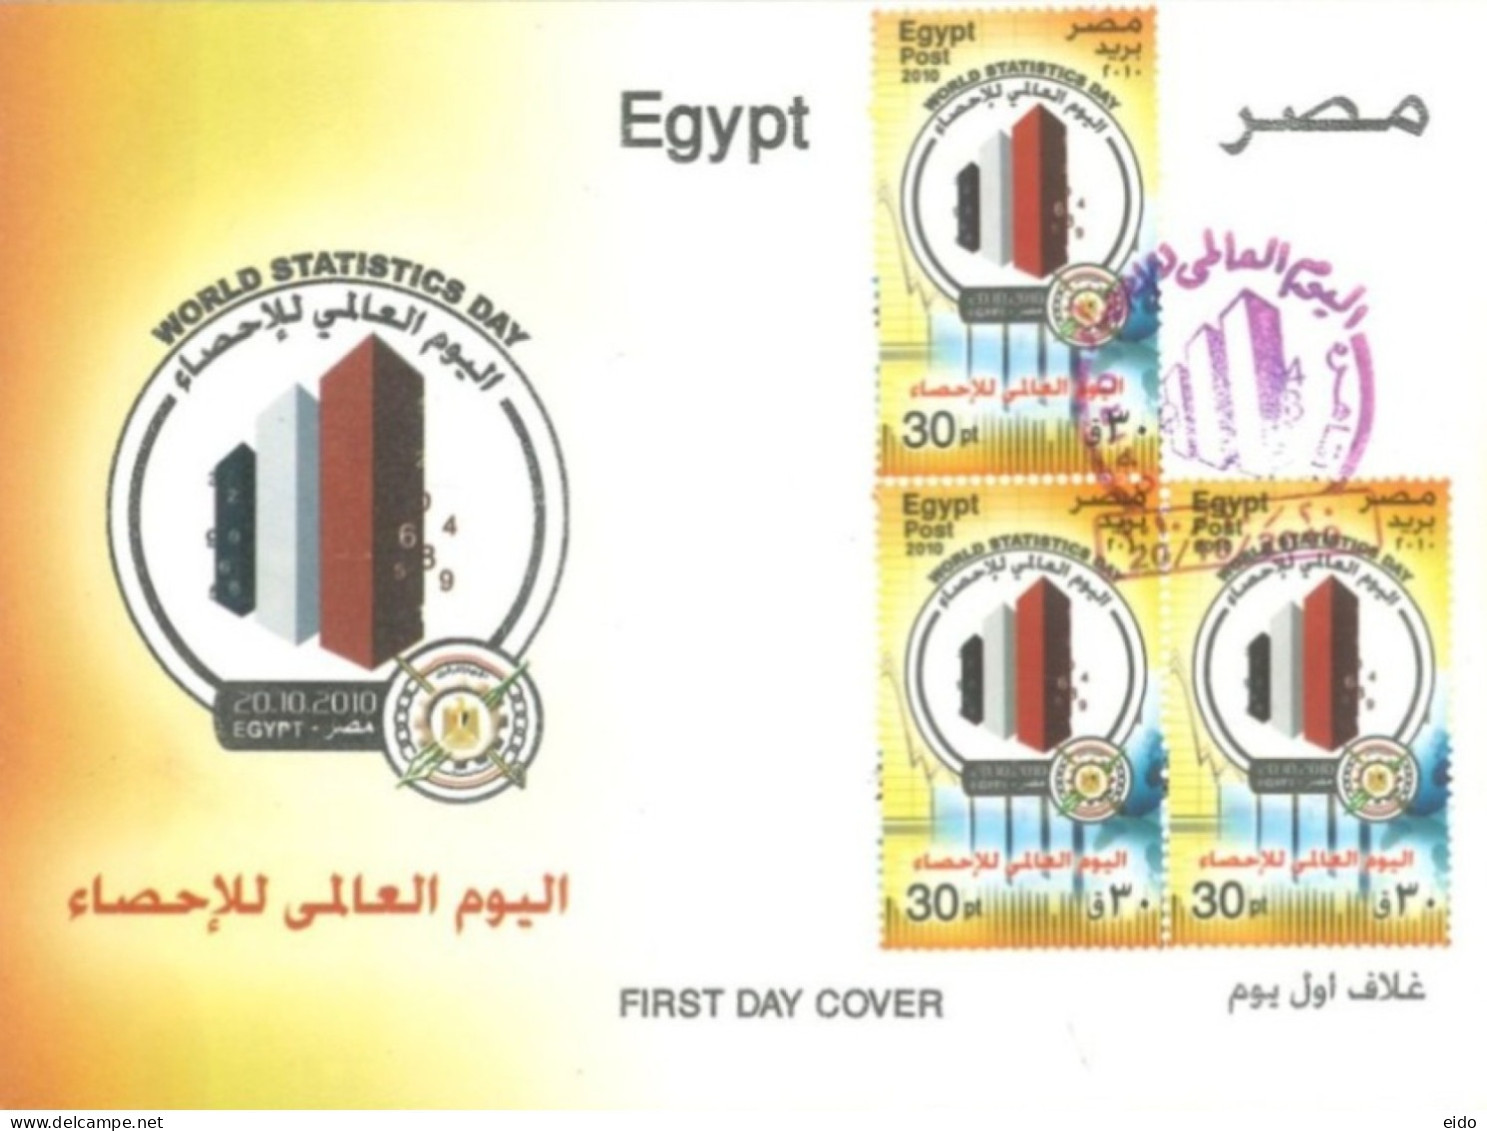 EGYPT - 2010, F.D.C. STAMPS OF WORLD STATISTICS DAY. - Covers & Documents